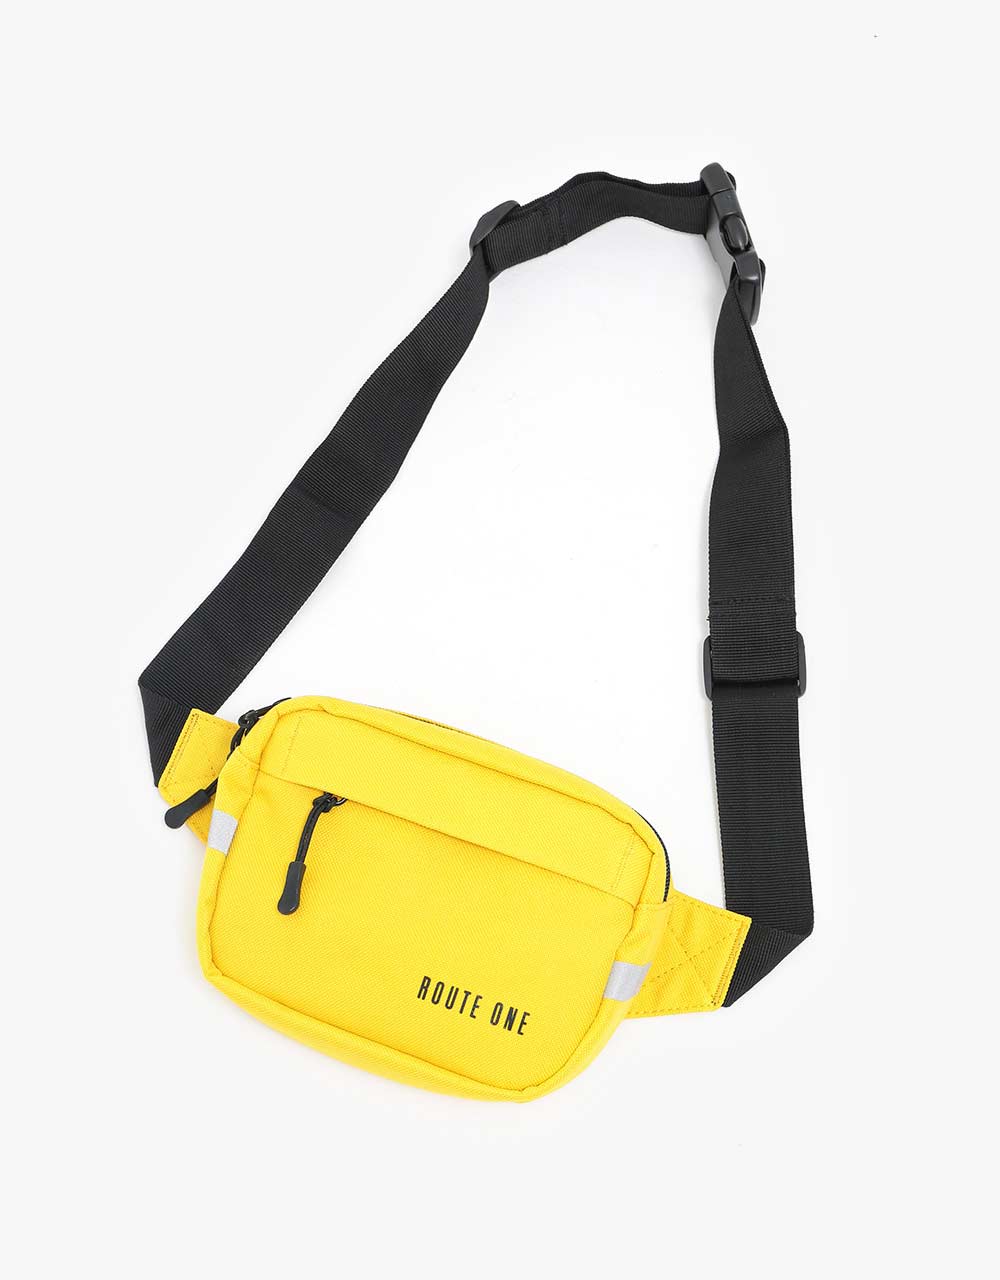 Route One Classic Cross Body Bag - Vibrant Yellow